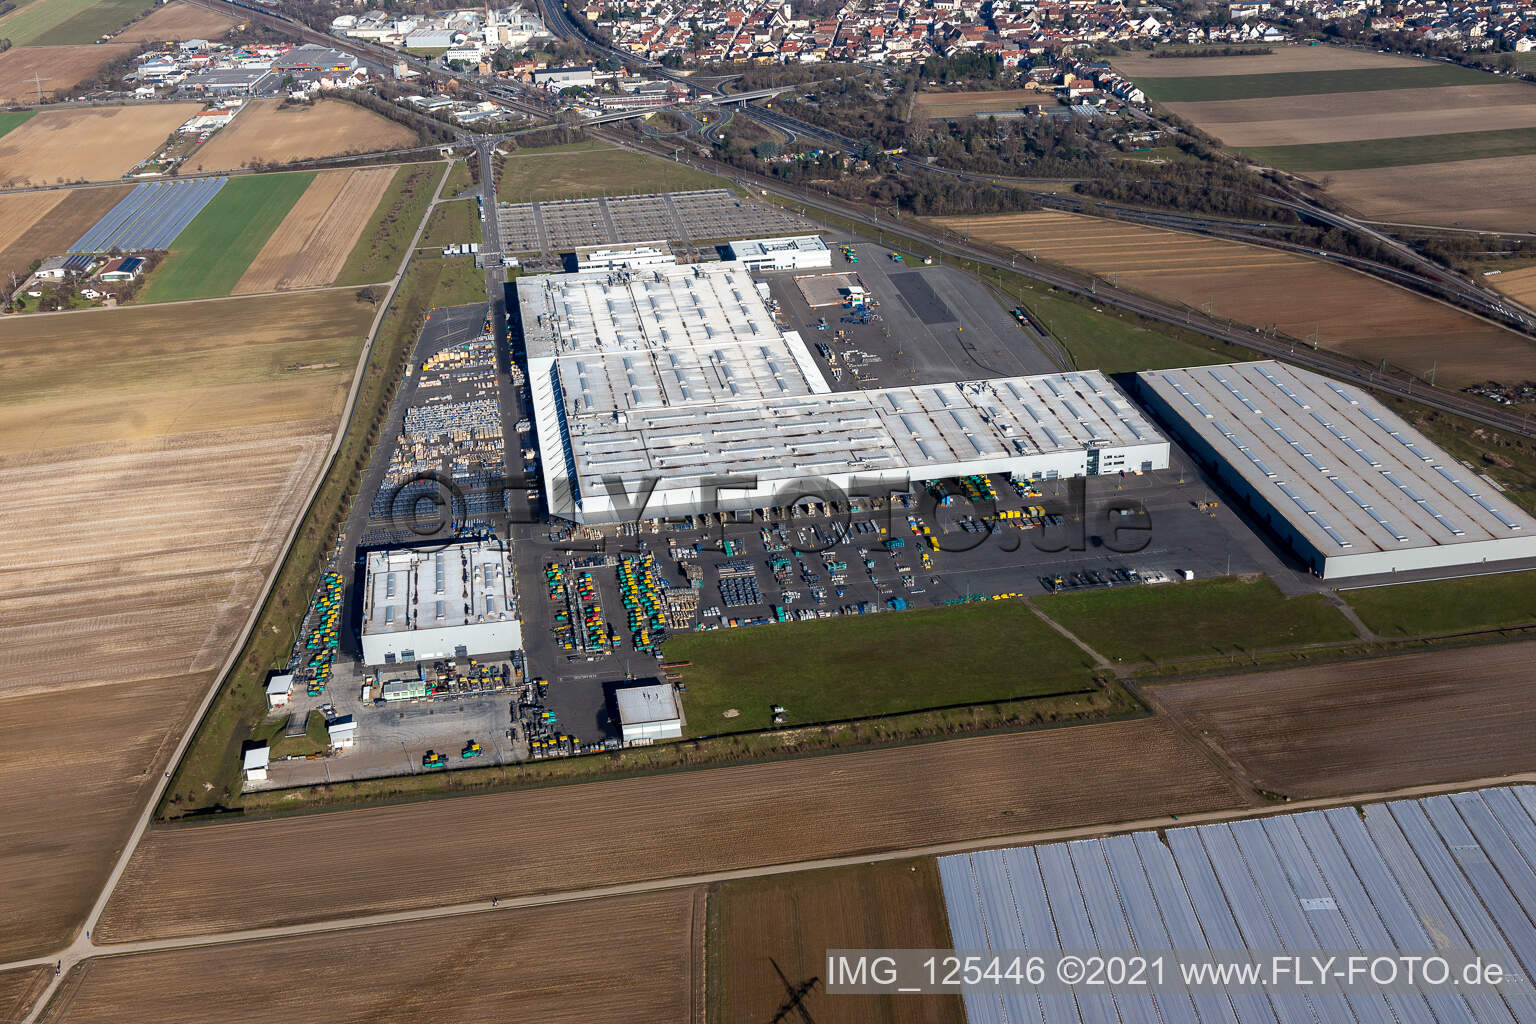 Buildings and production halls on the vehicle construction site of Joseph Voegele AG in the district Rheingoenheim in Ludwigshafen am Rhein in the state Rhineland-Palatinate, Germany from above